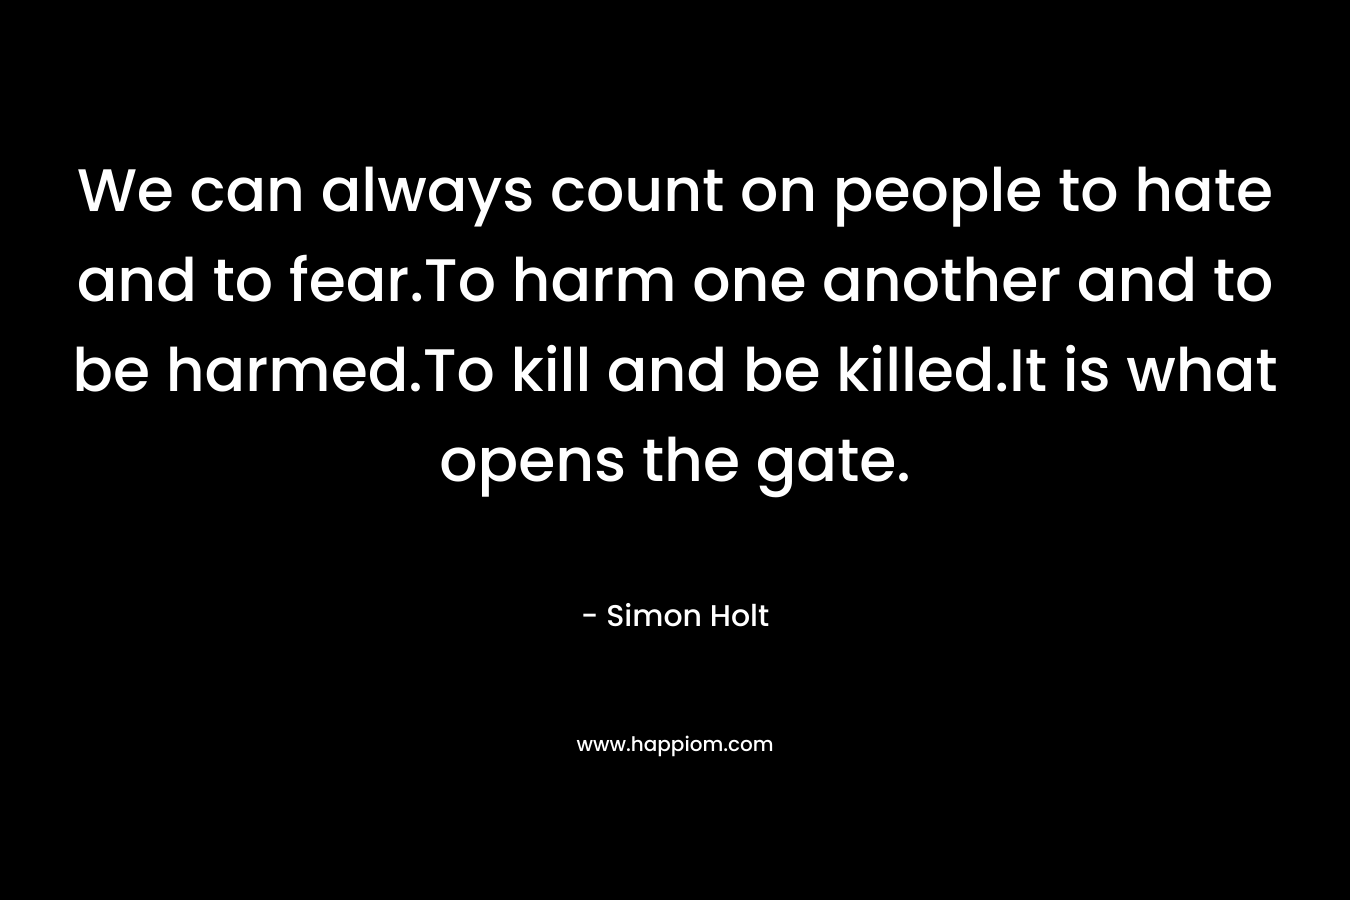 We can always count on people to hate and to fear.To harm one another and to be harmed.To kill and be killed.It is what opens the gate.